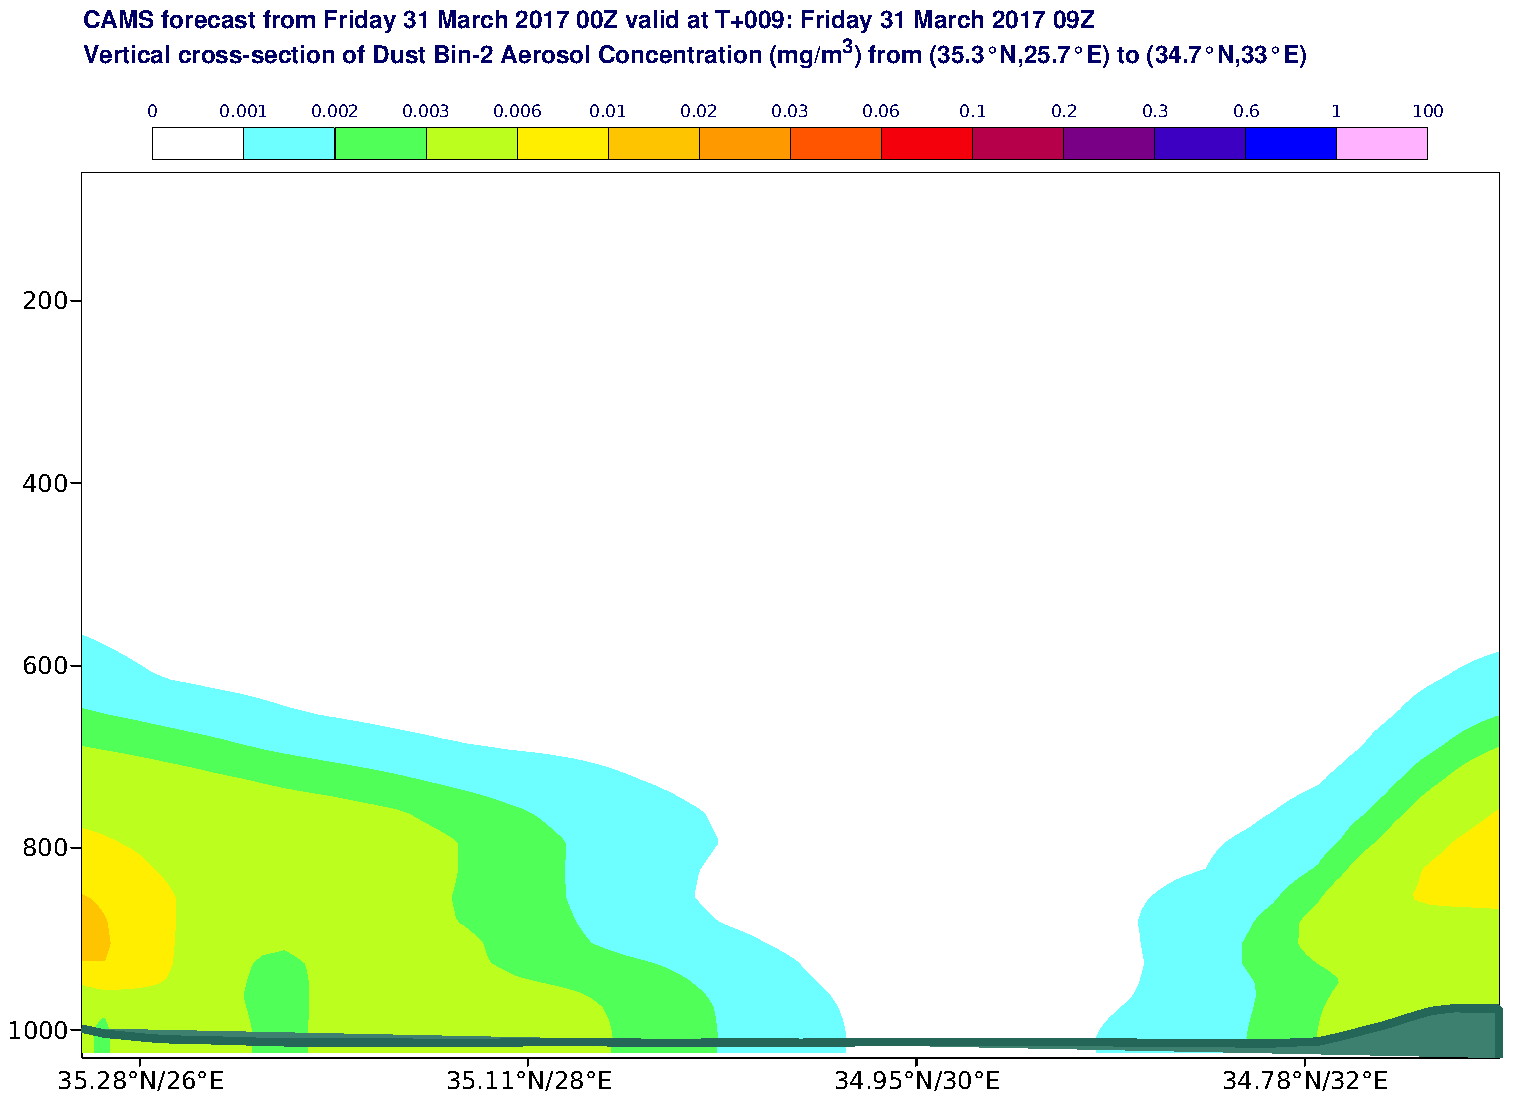 Vertical cross-section of Dust Bin-2 Aerosol Concentration (mg/m3) valid at T9 - 2017-03-31 09:00